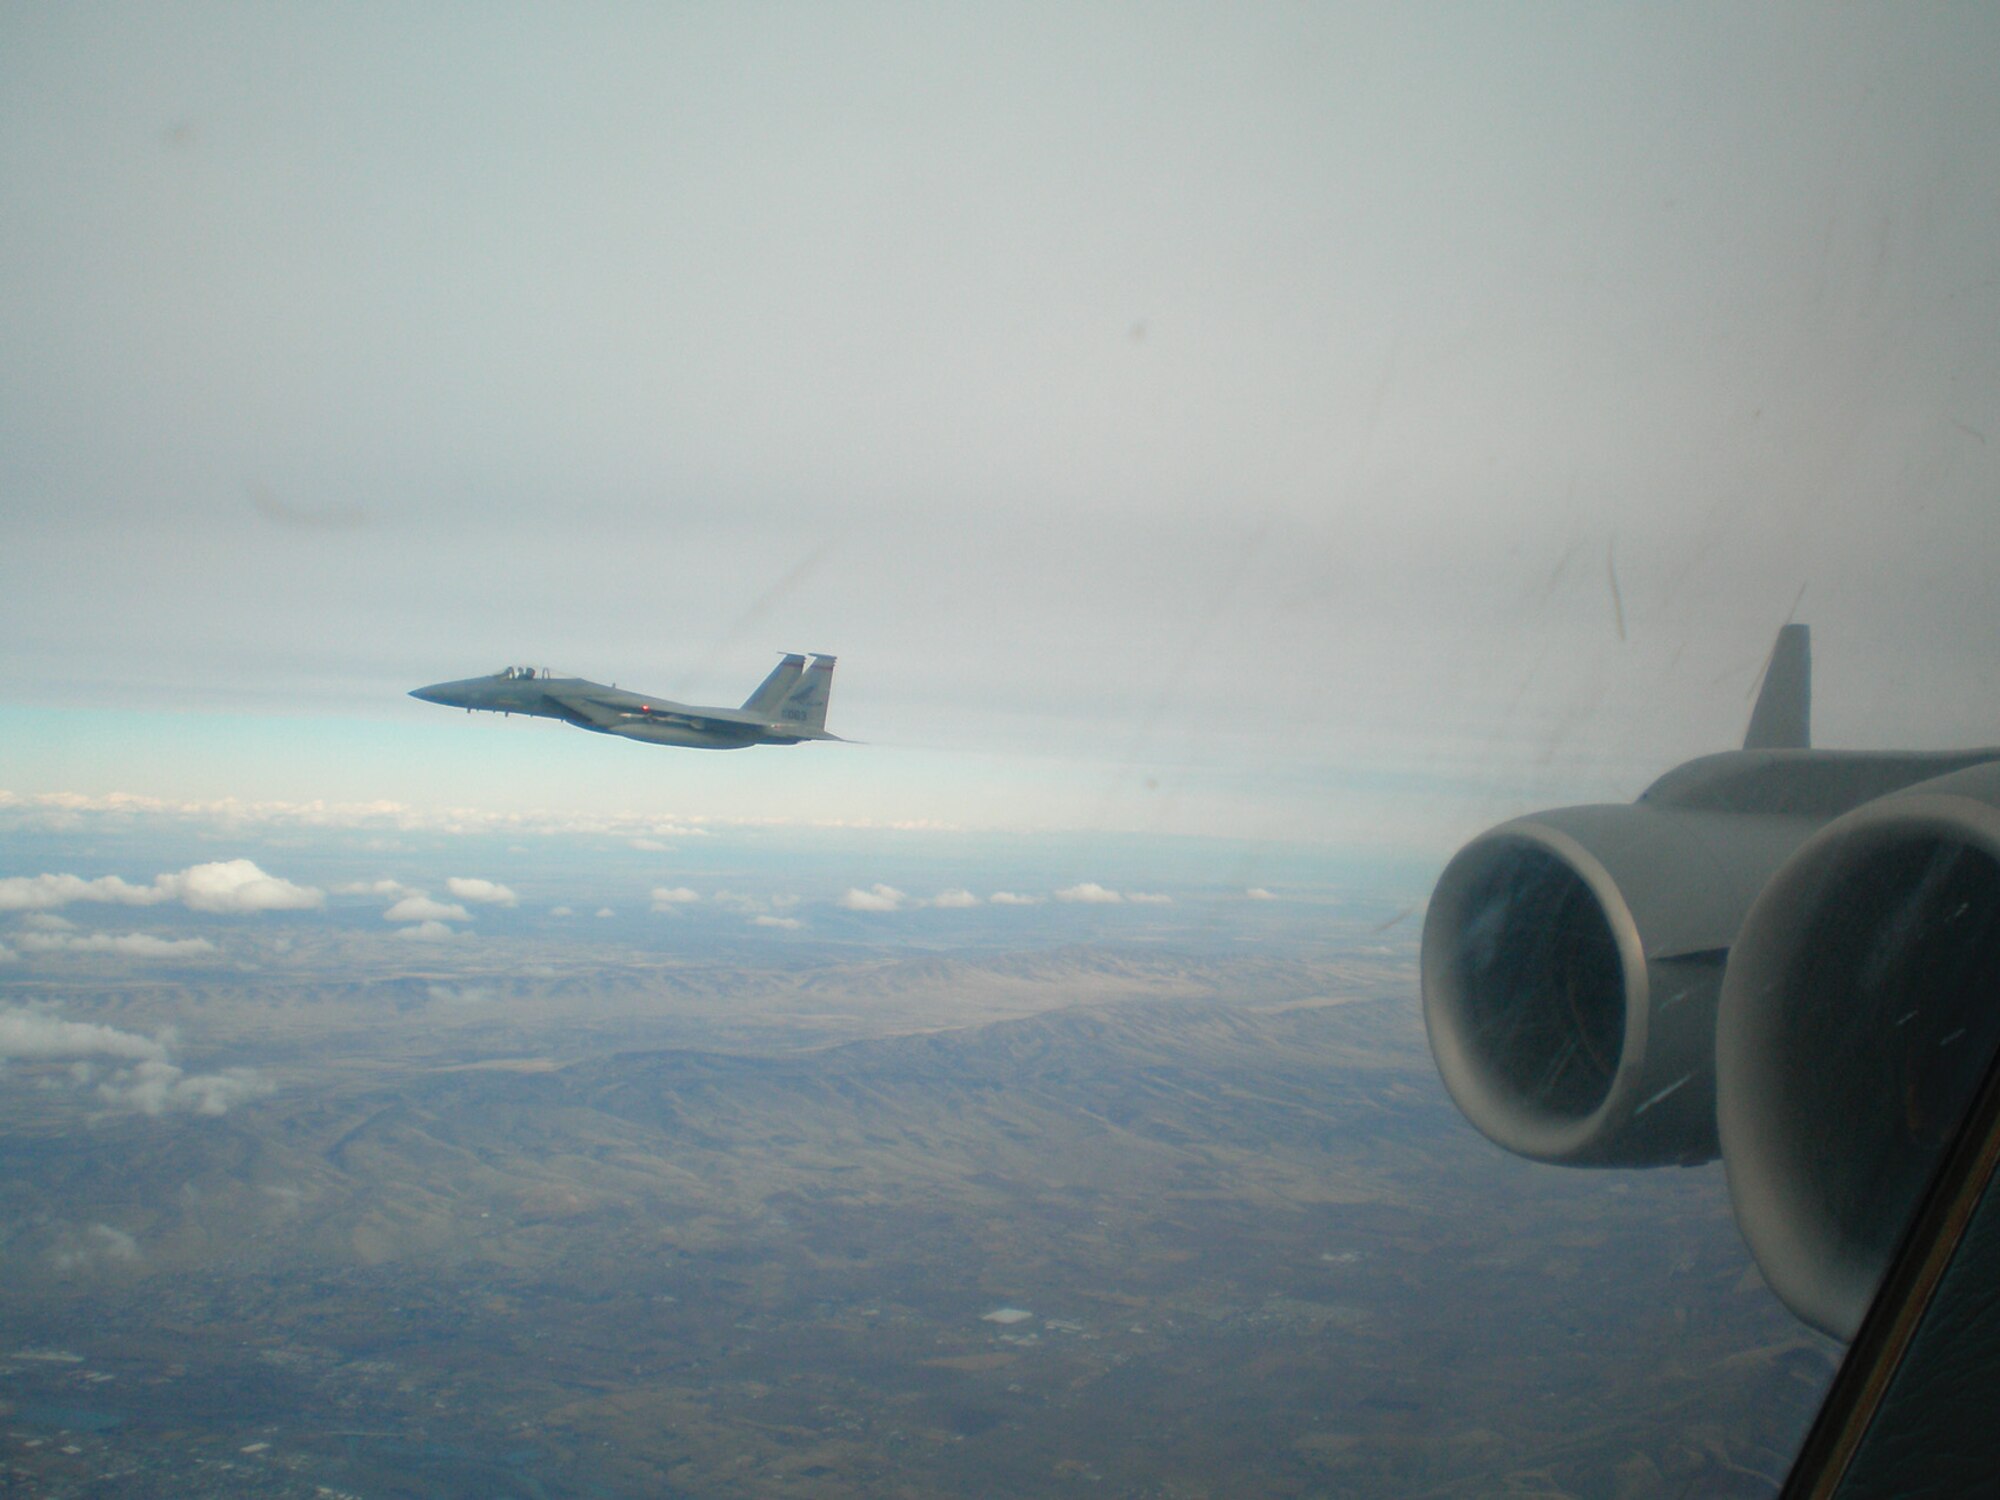 MCCHORD AIR FORCE BASE, Wash. -- An F-15 Eagle from Klamath Falls, Ore., flies alongside a McChord C-17 Globemaster III as part of a Simulated Penetration Air Defense Exercise scenario over central Washington in February. The C-17 is playing the role of a hijacked airliner. (U.S. Air Force photo)
